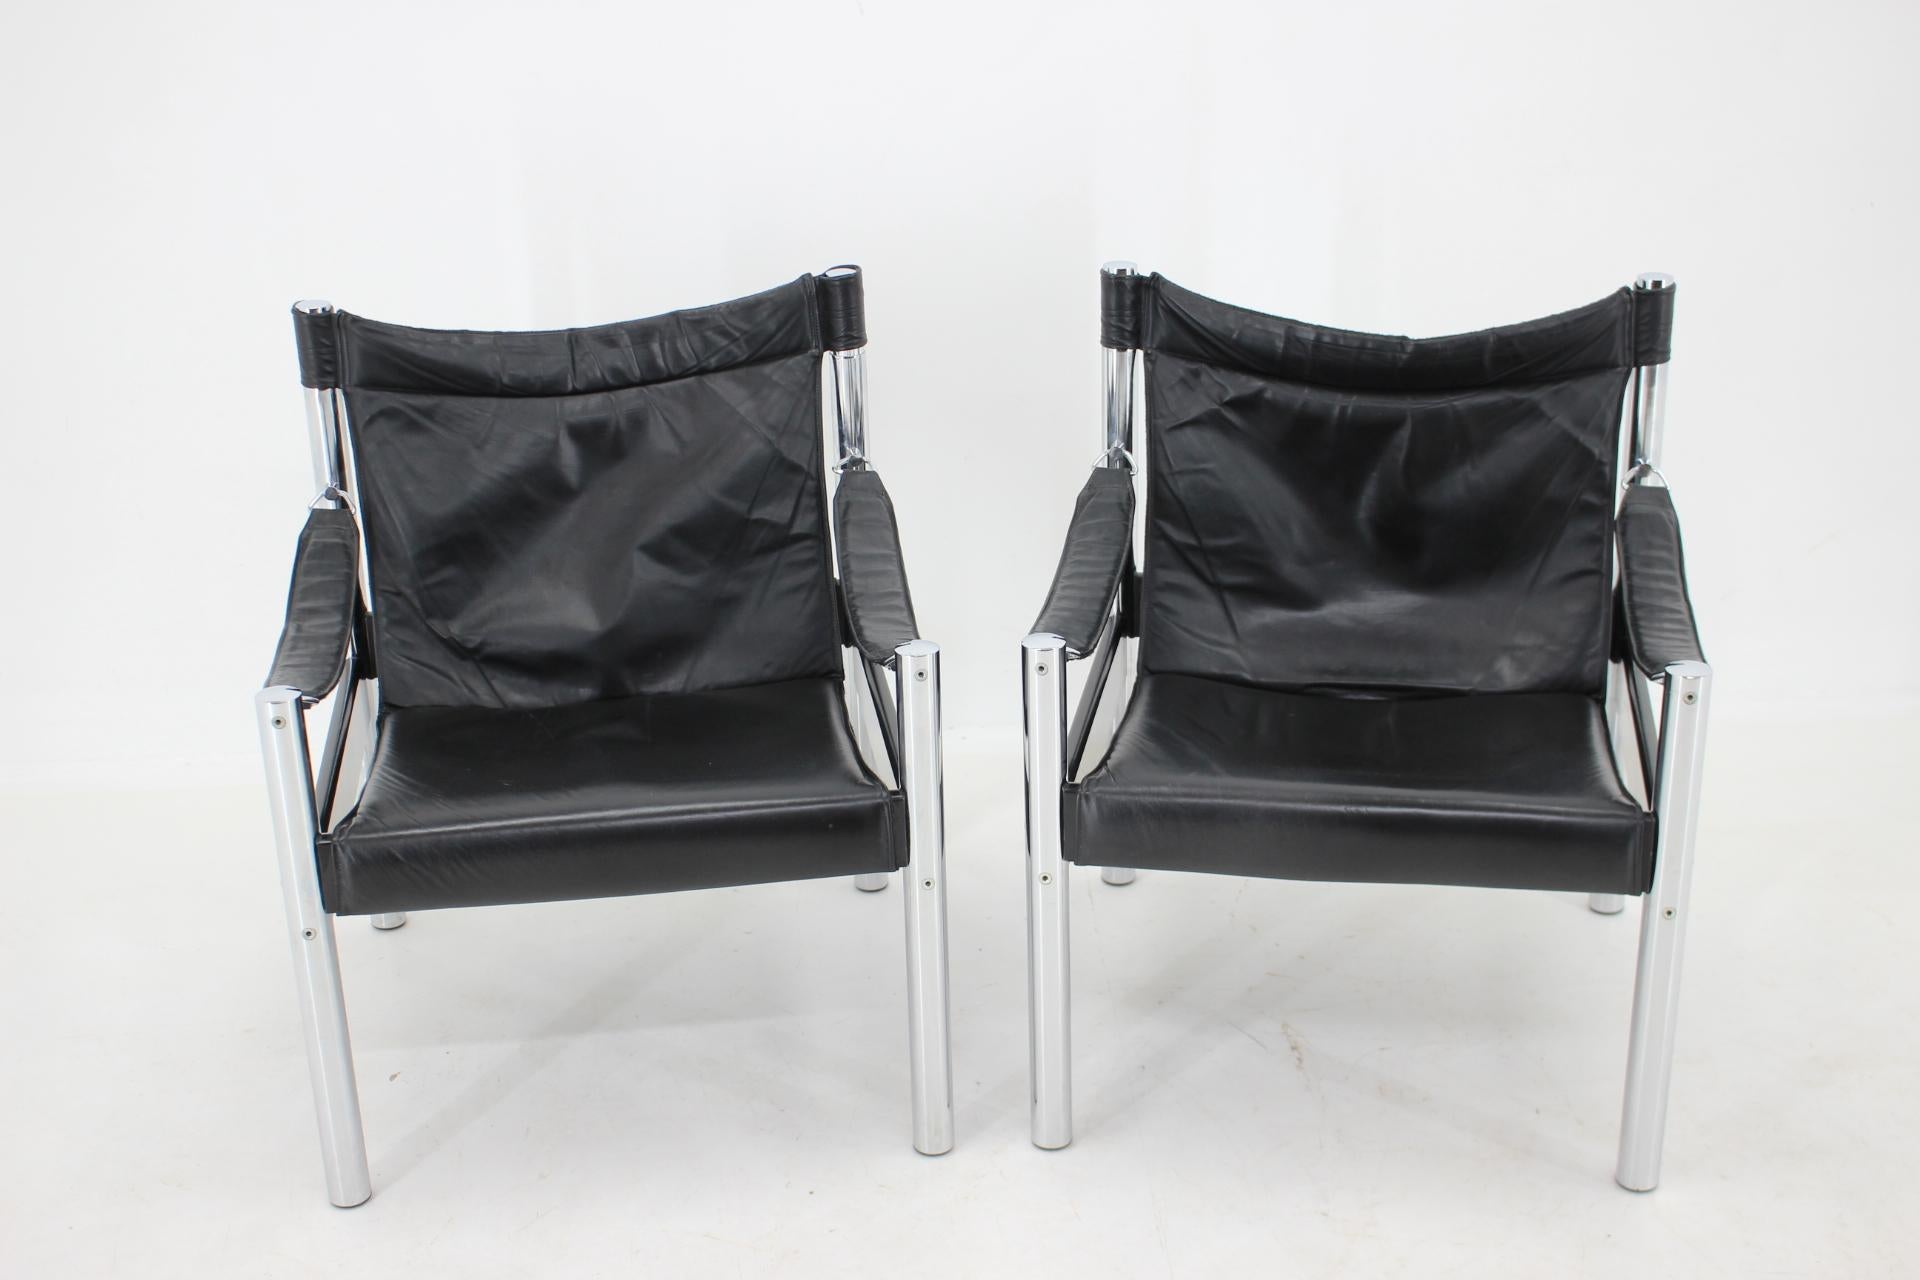 1970s Black Leather and Chrome Safari Chair by Johanson Design, Markaryd In Good Condition For Sale In Praha, CZ